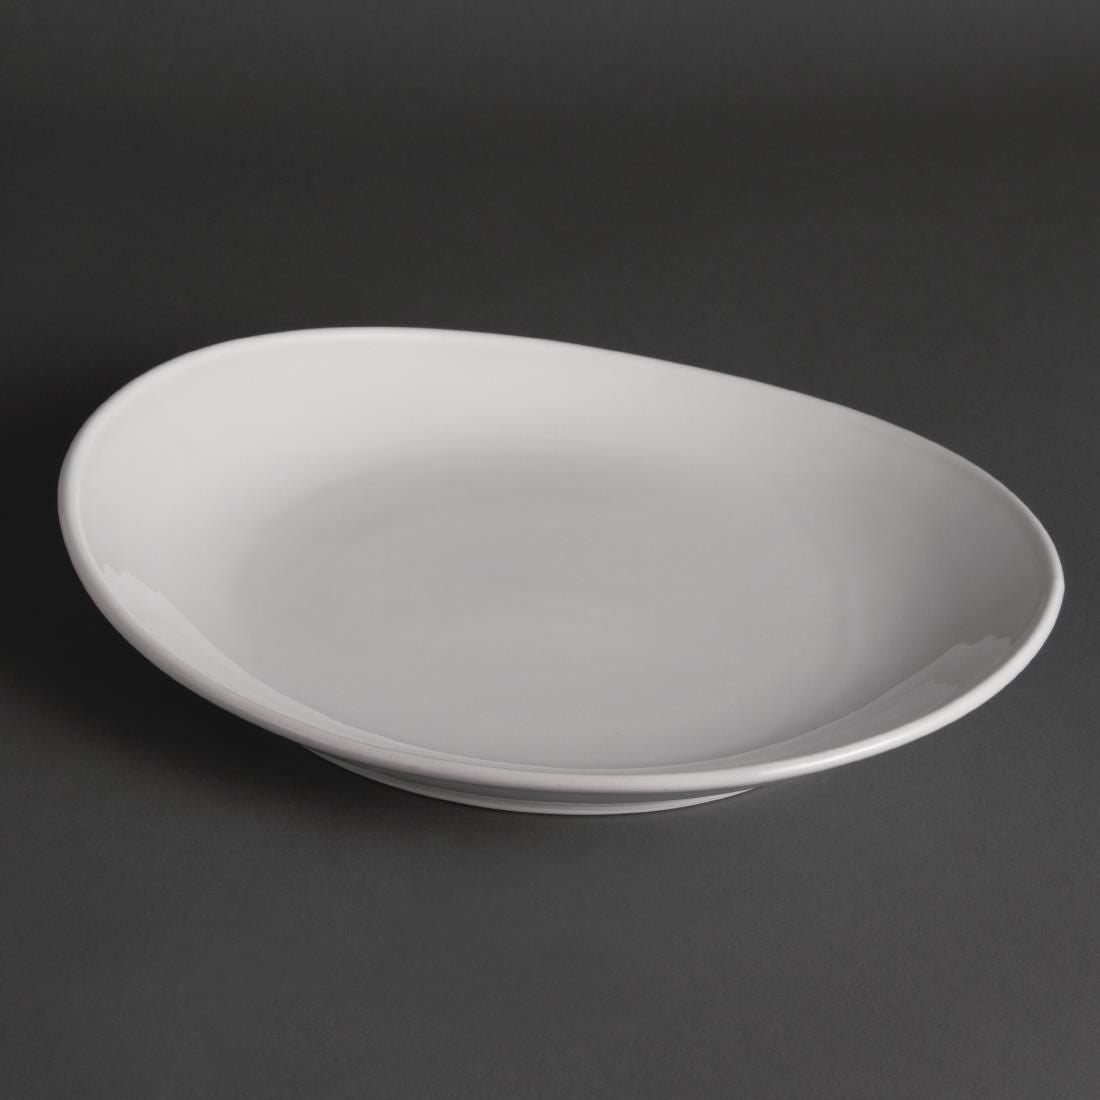 Y132 Olympia Steak Plates 300mm (Pack of 6)